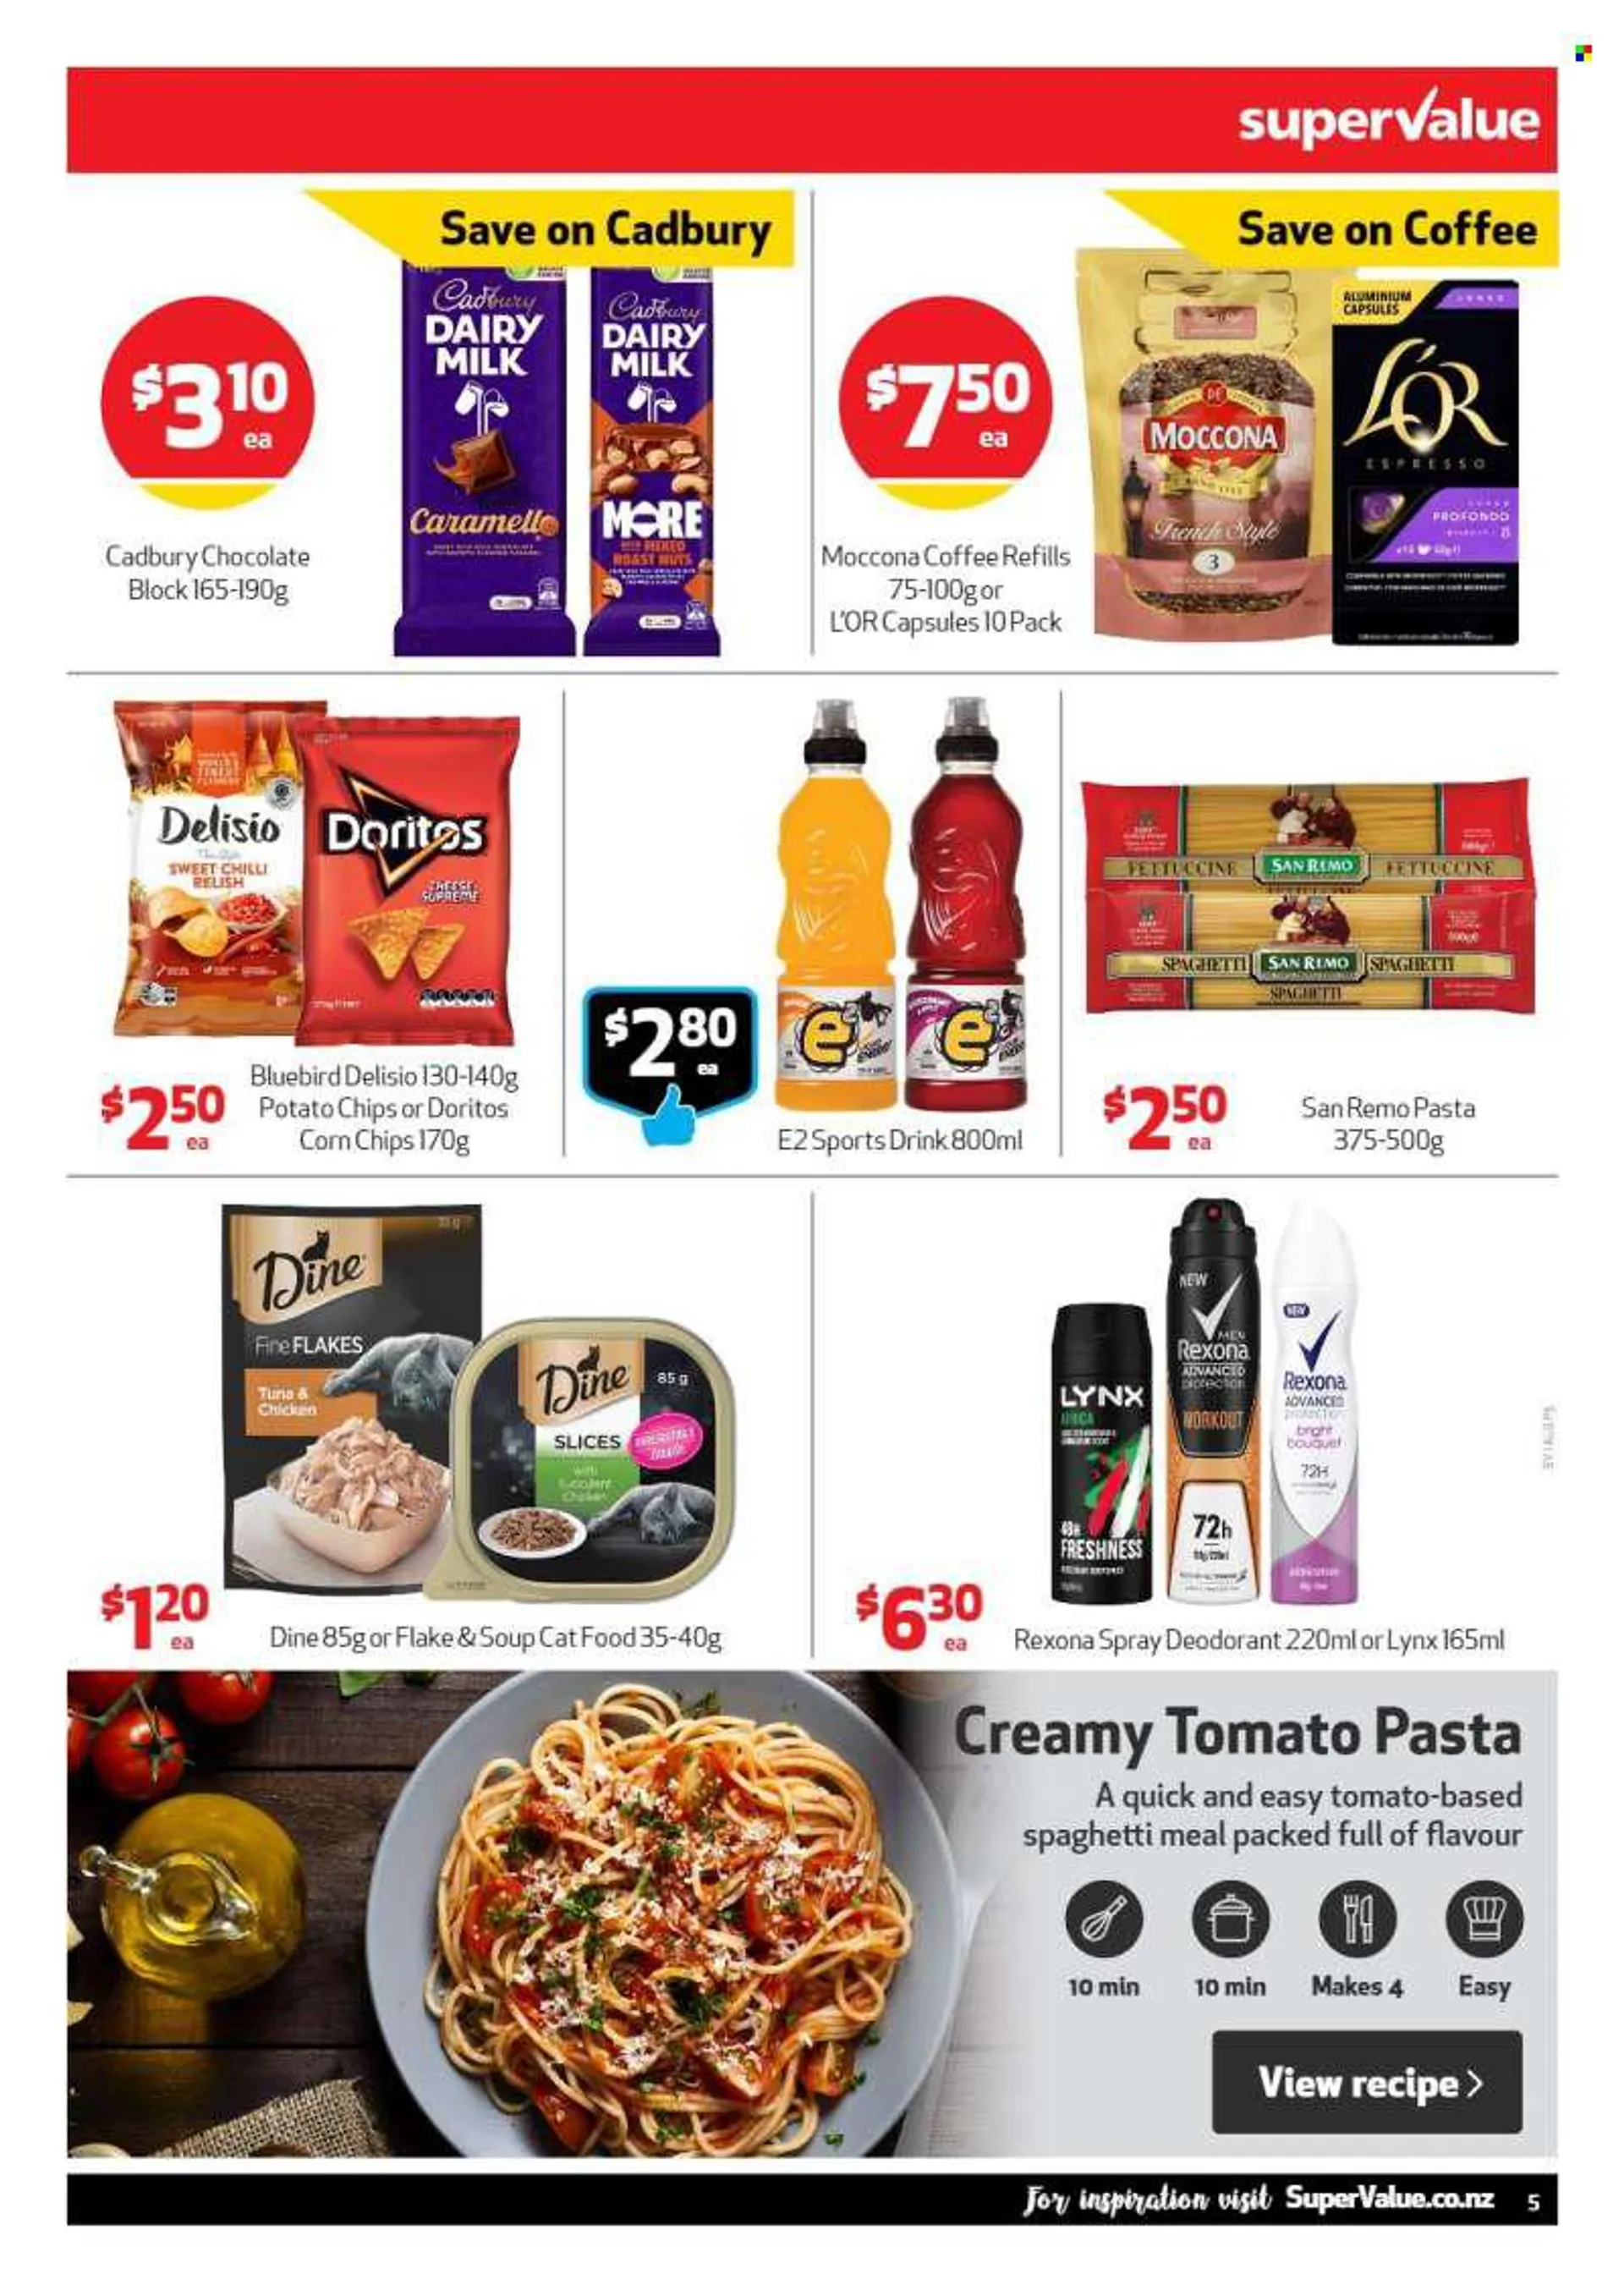 SuperValue mailer - 01.08.2022 - 07.08.2022 - Sales products - spaghetti, soup, pasta, chocolate, Cadbury, Dairy Milk, Doritos, potato chips, chips, corn chips, Bluebird, Delisio, caramel, nuts, Nespresso, Moccona, LOr, animal food, cat food. Page 5.